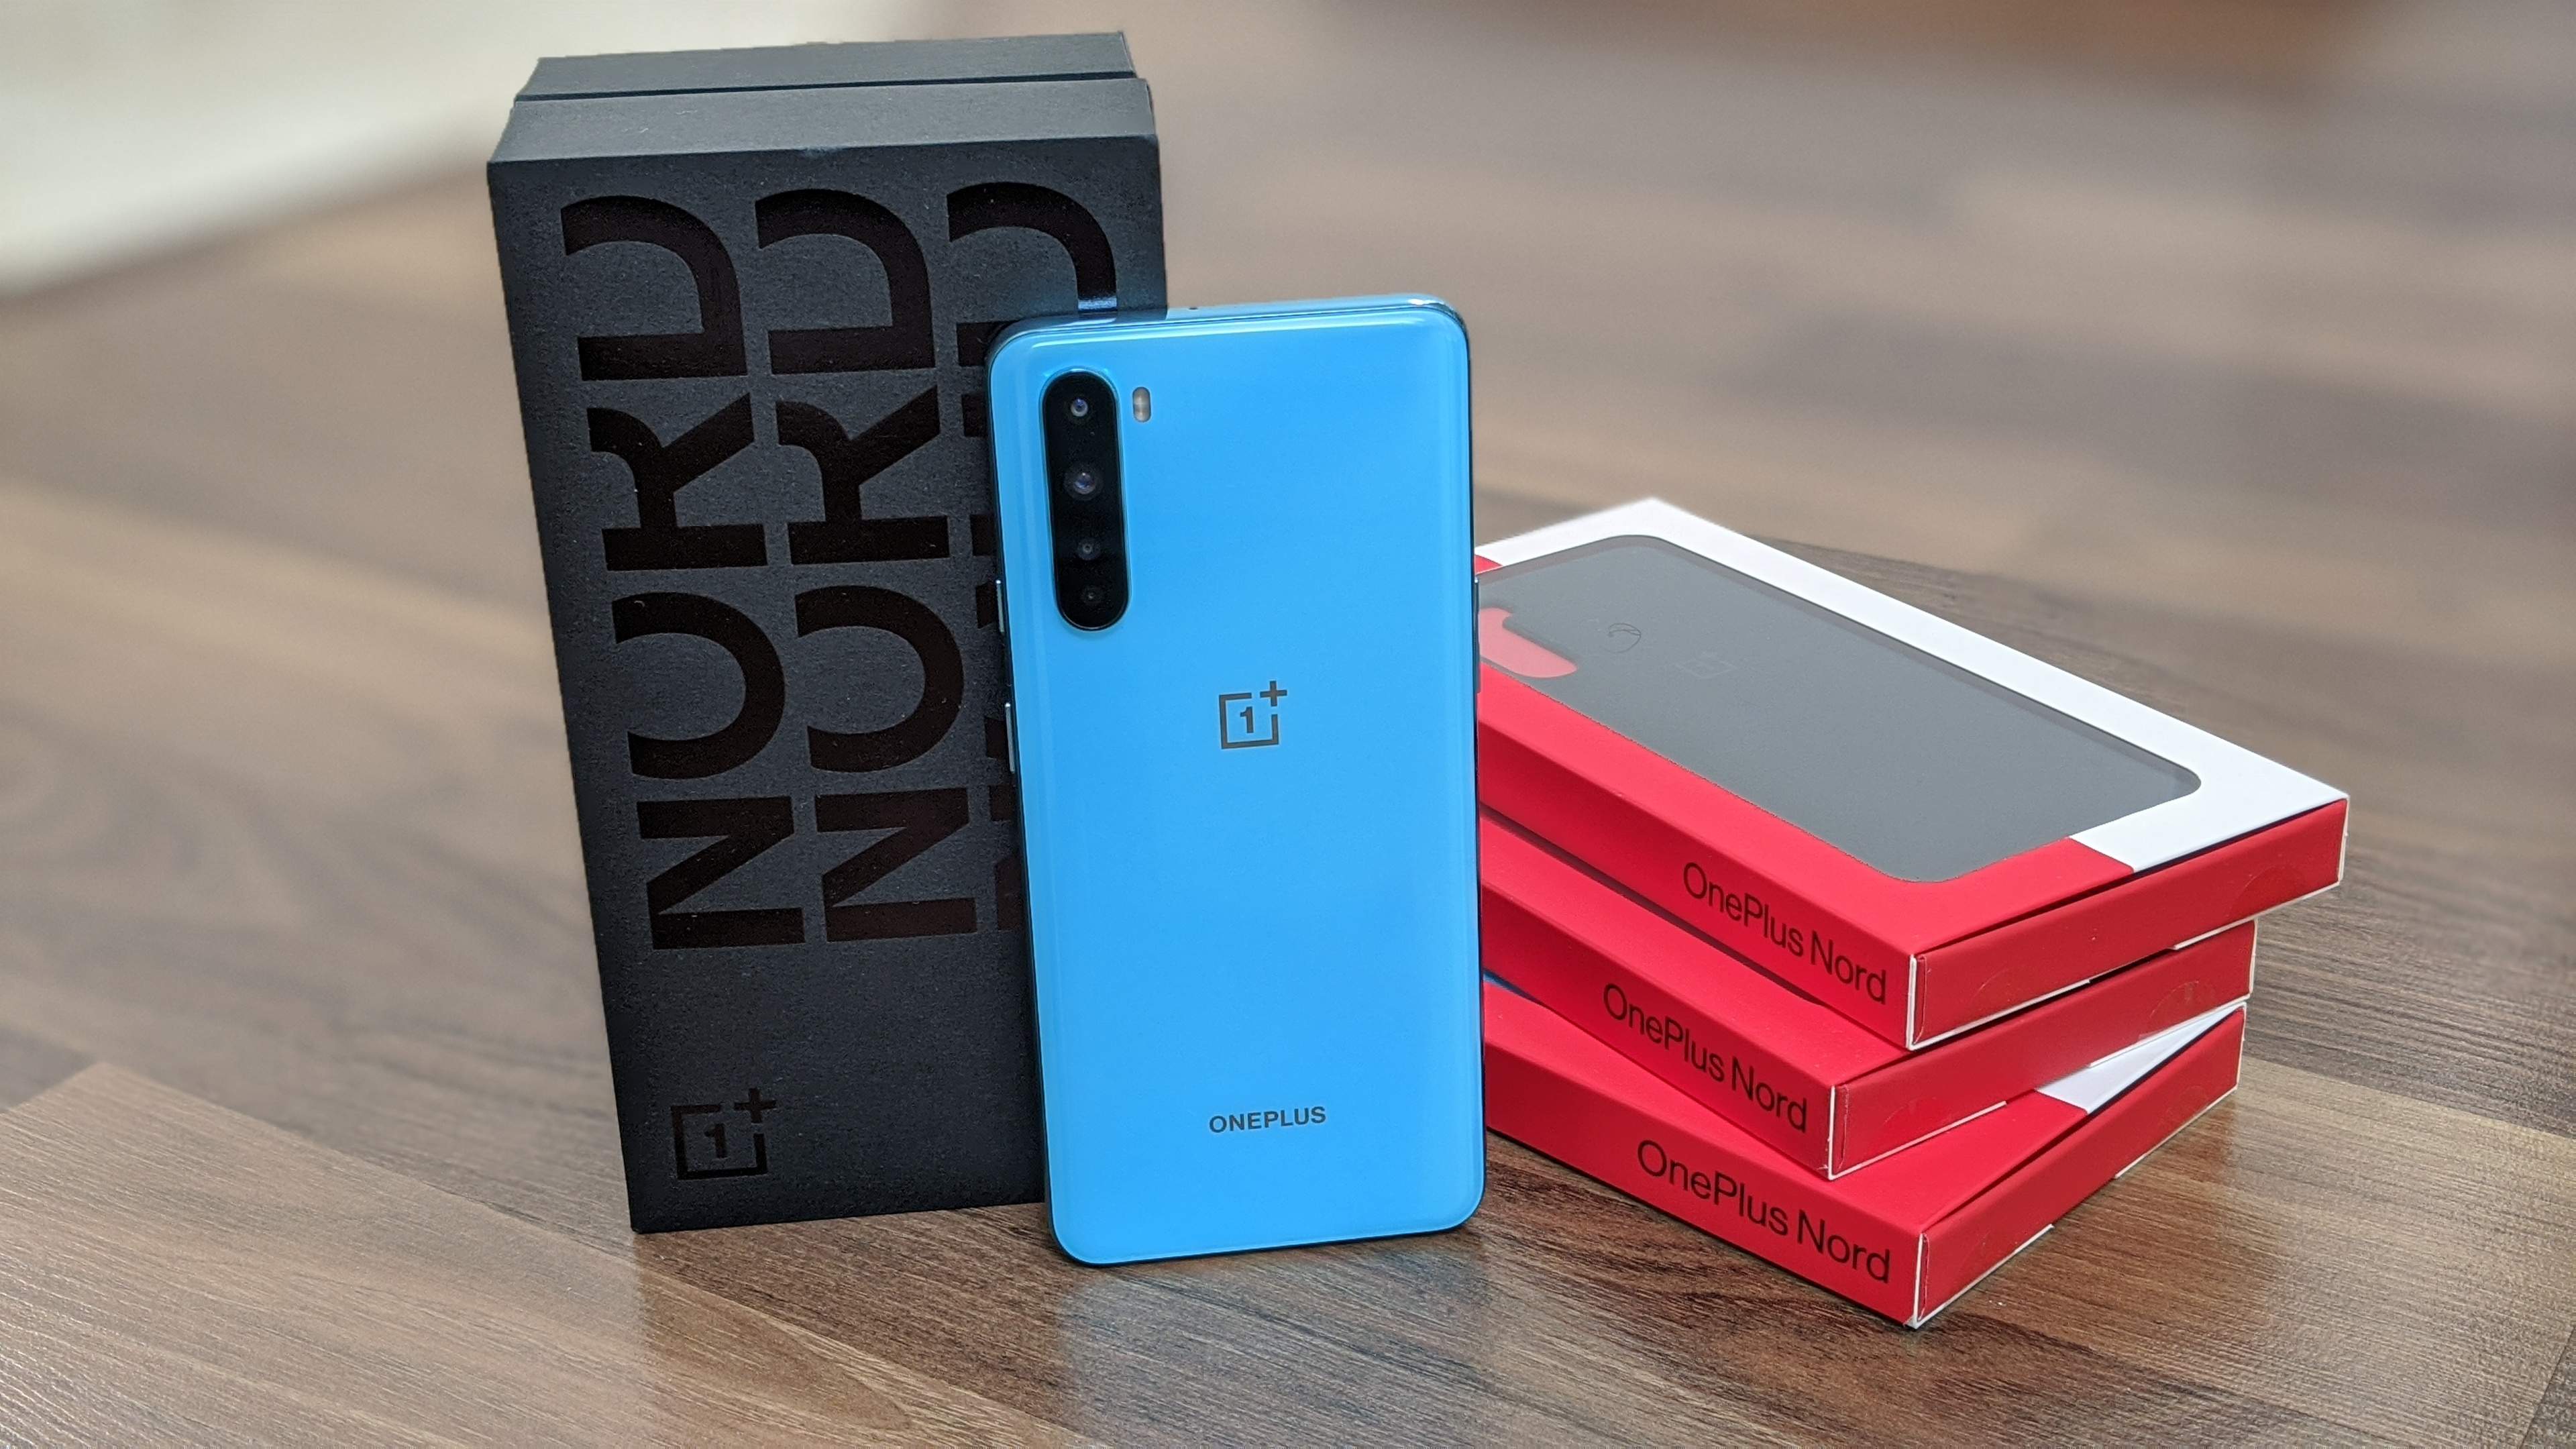 OnePlusNord - OnePlus Nord price in Nigeria and Full Specs